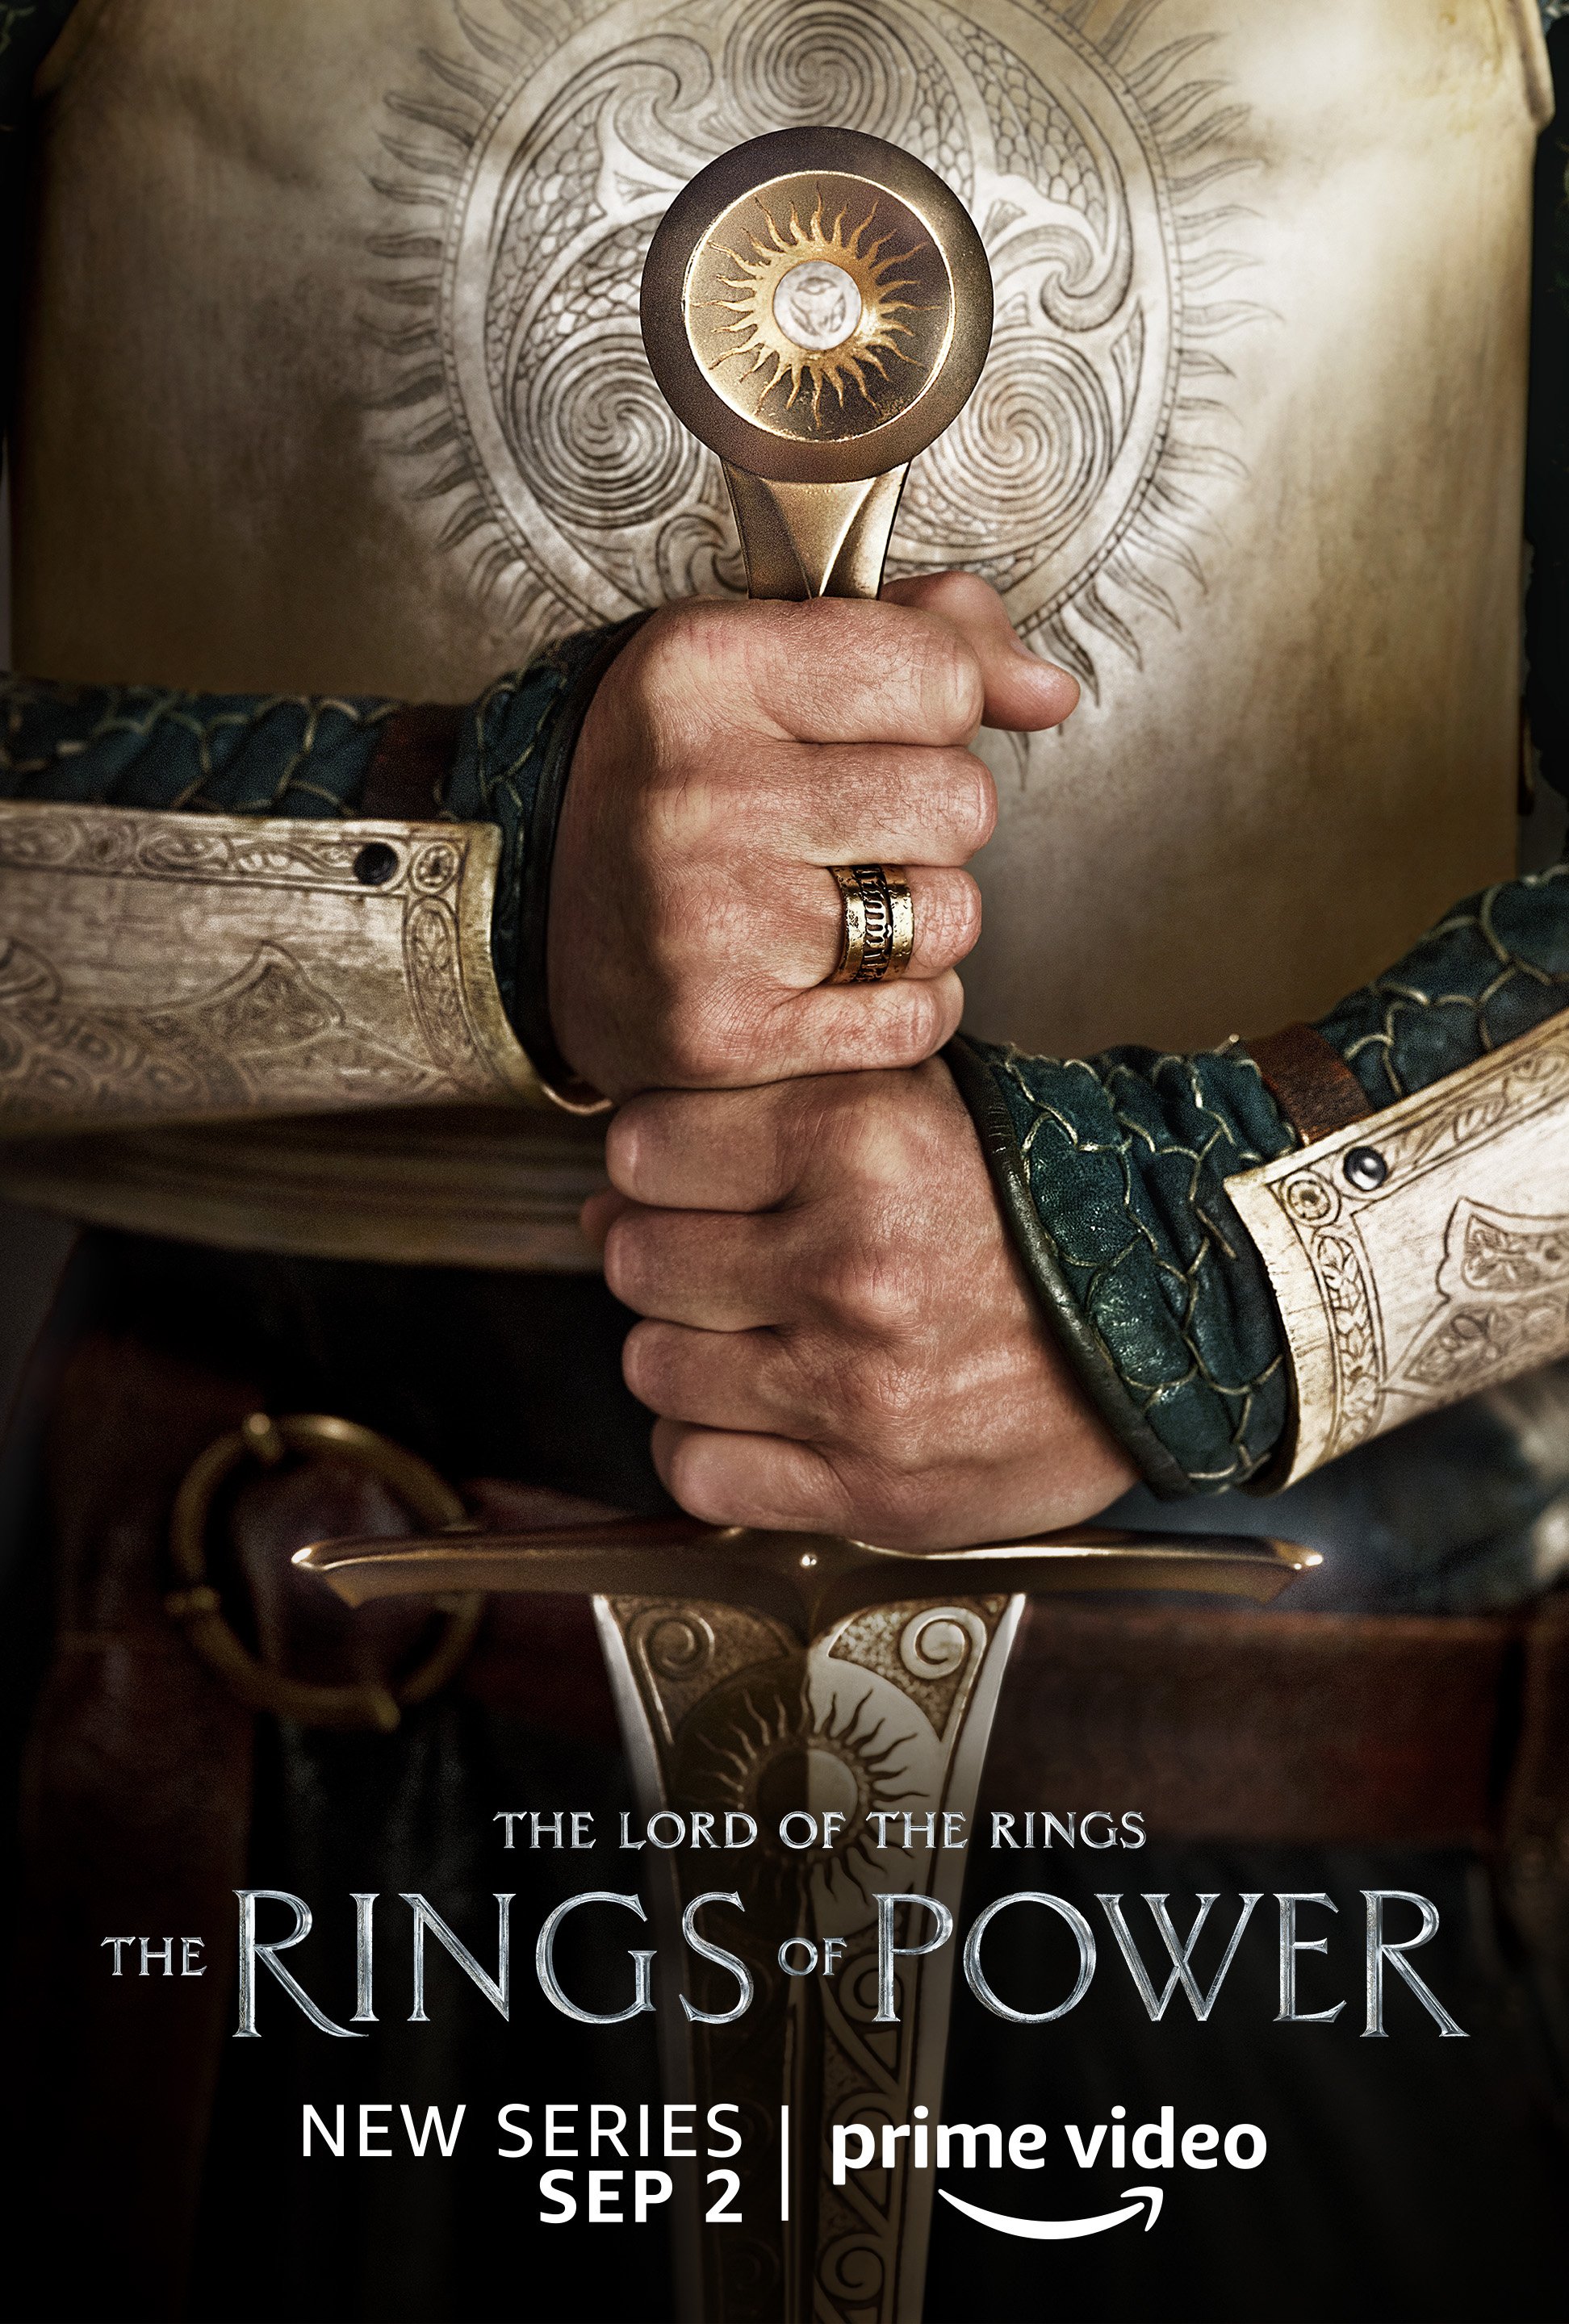 Lord of the Rings' Series 'Rings of Power': Trailer